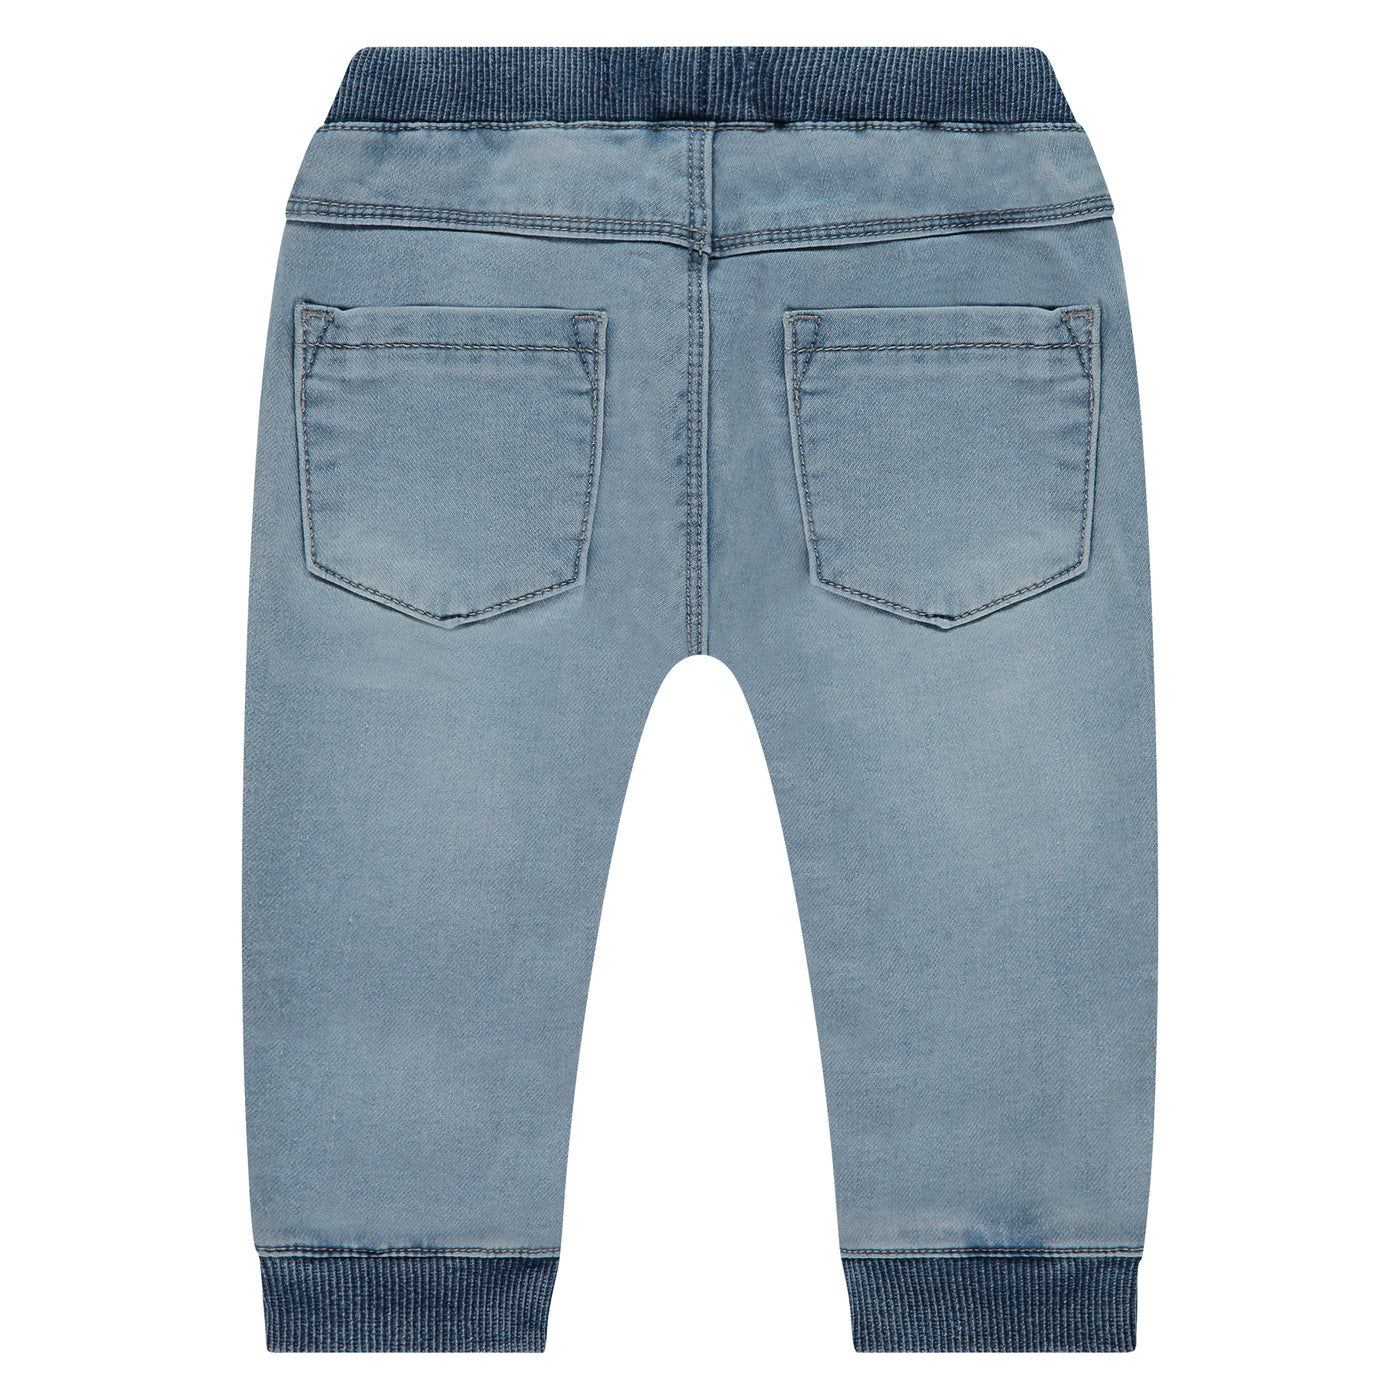 Joggs Baby Jeans in Light Blue Denim